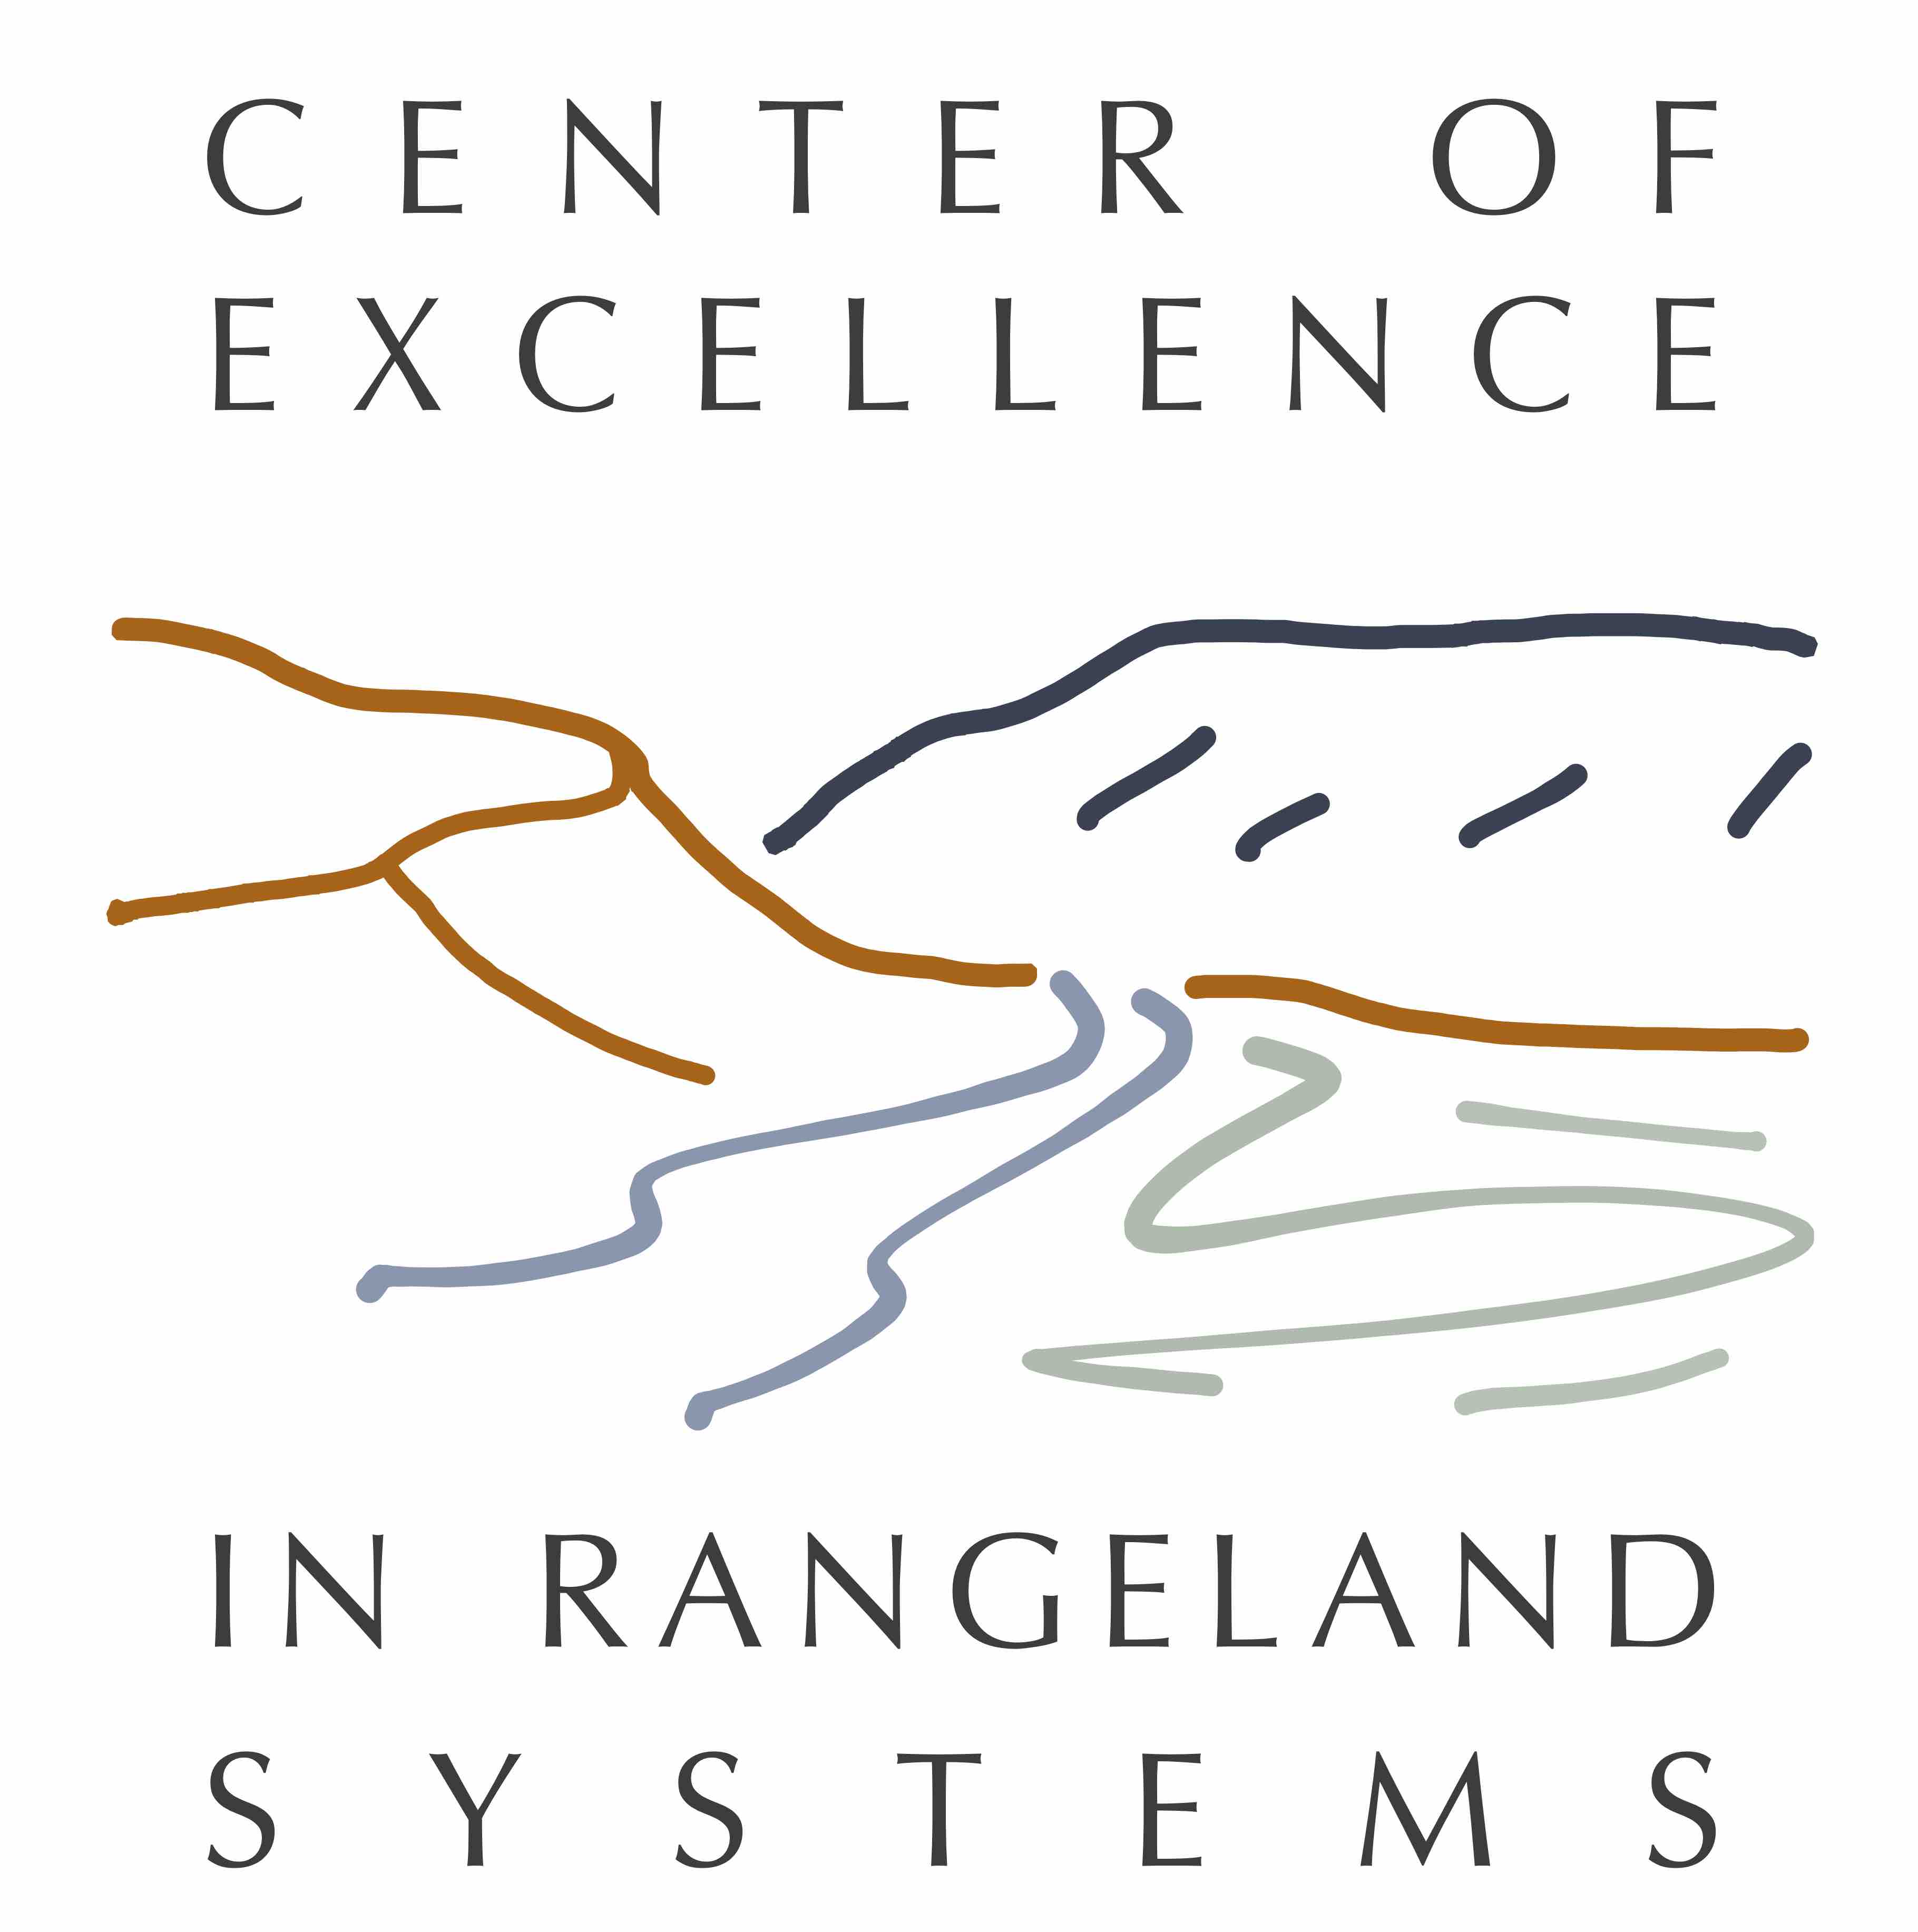 Center of excellence in rangeland systems logo